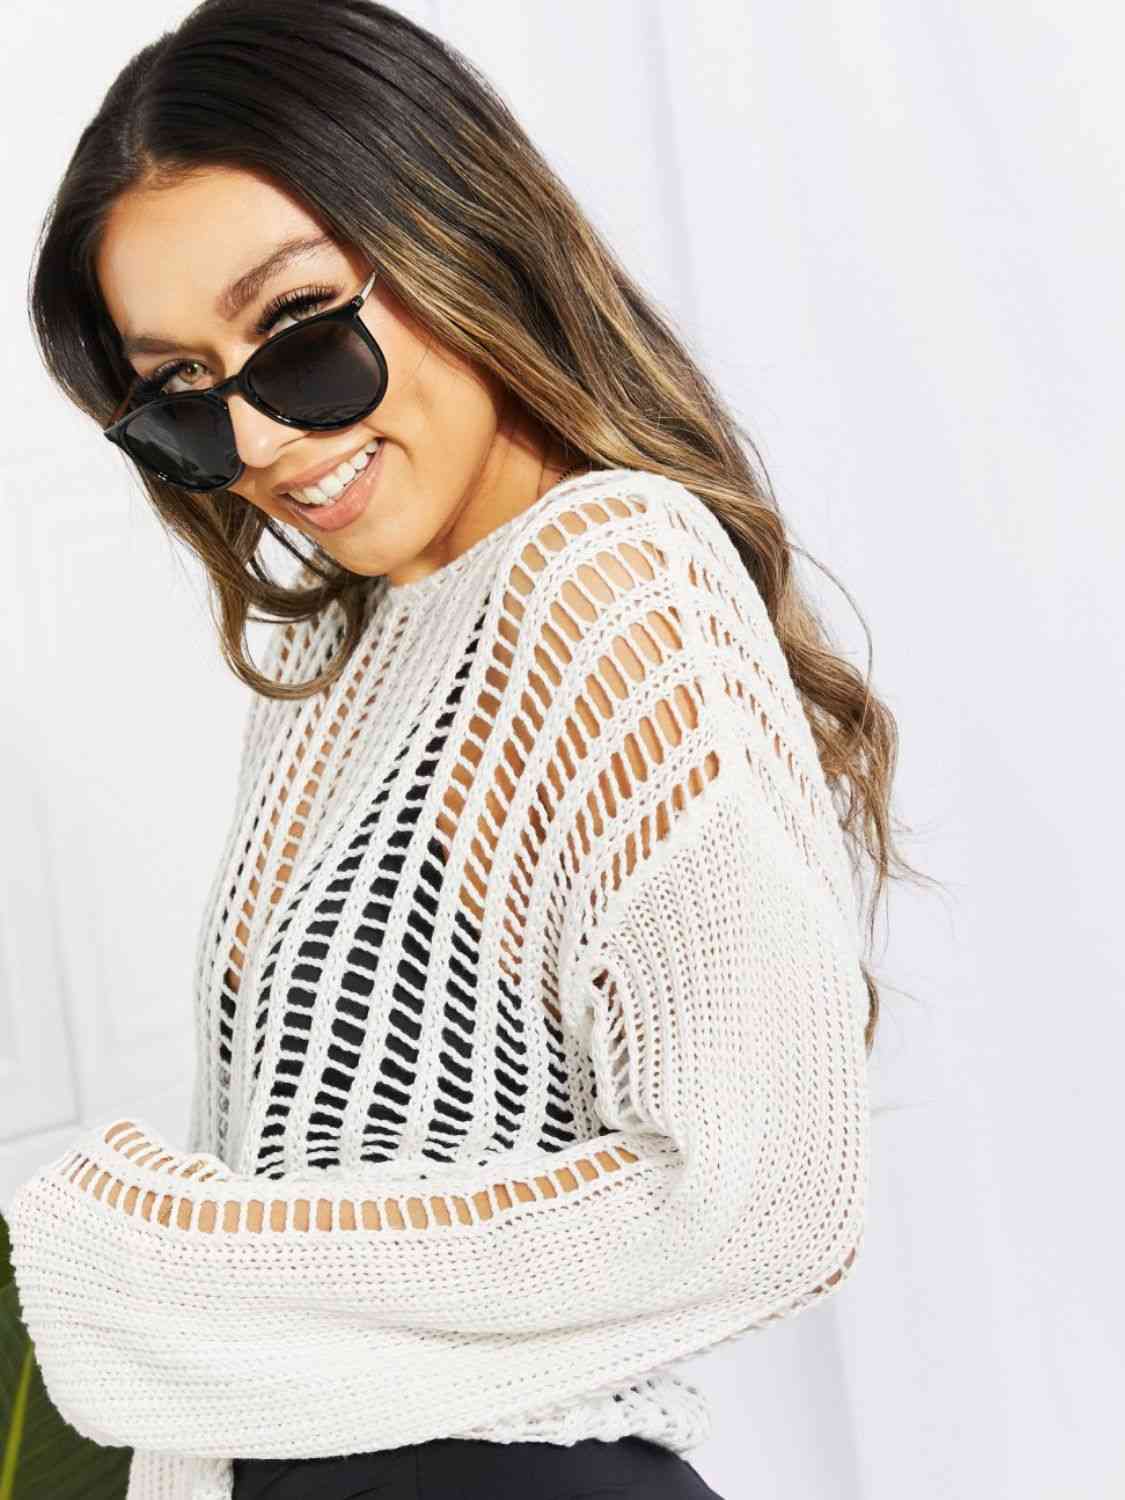 a woman wearing a white sweater and black sunglasses